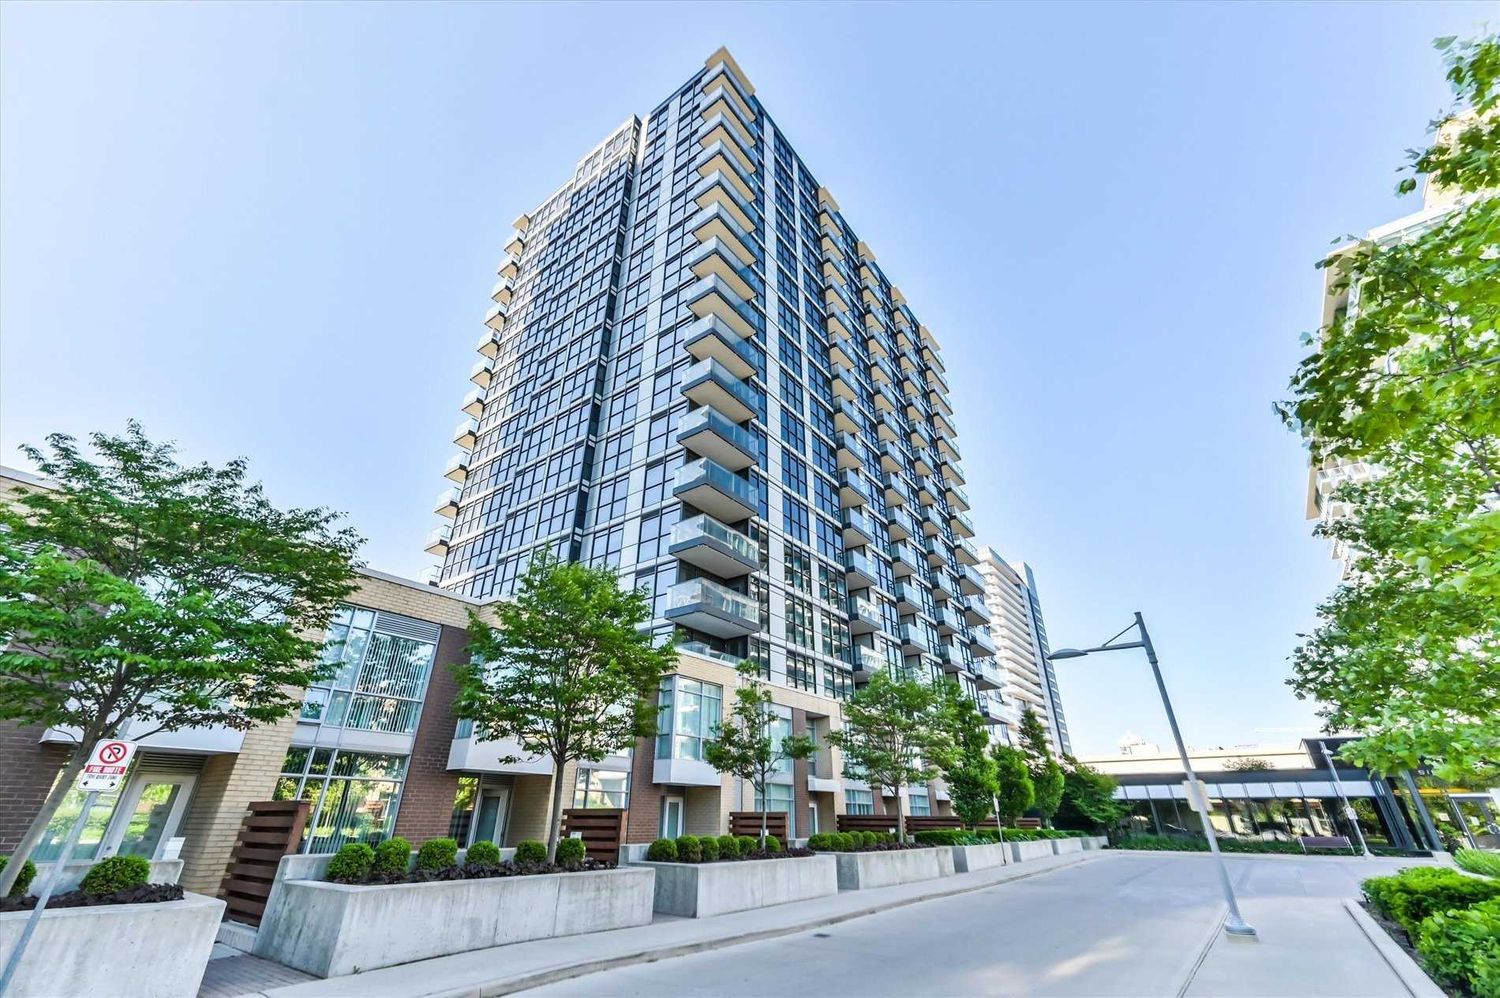 15-33 Singer Court. Discovery I & Discovery II Condos is located in  North York, Toronto - image #3 of 3